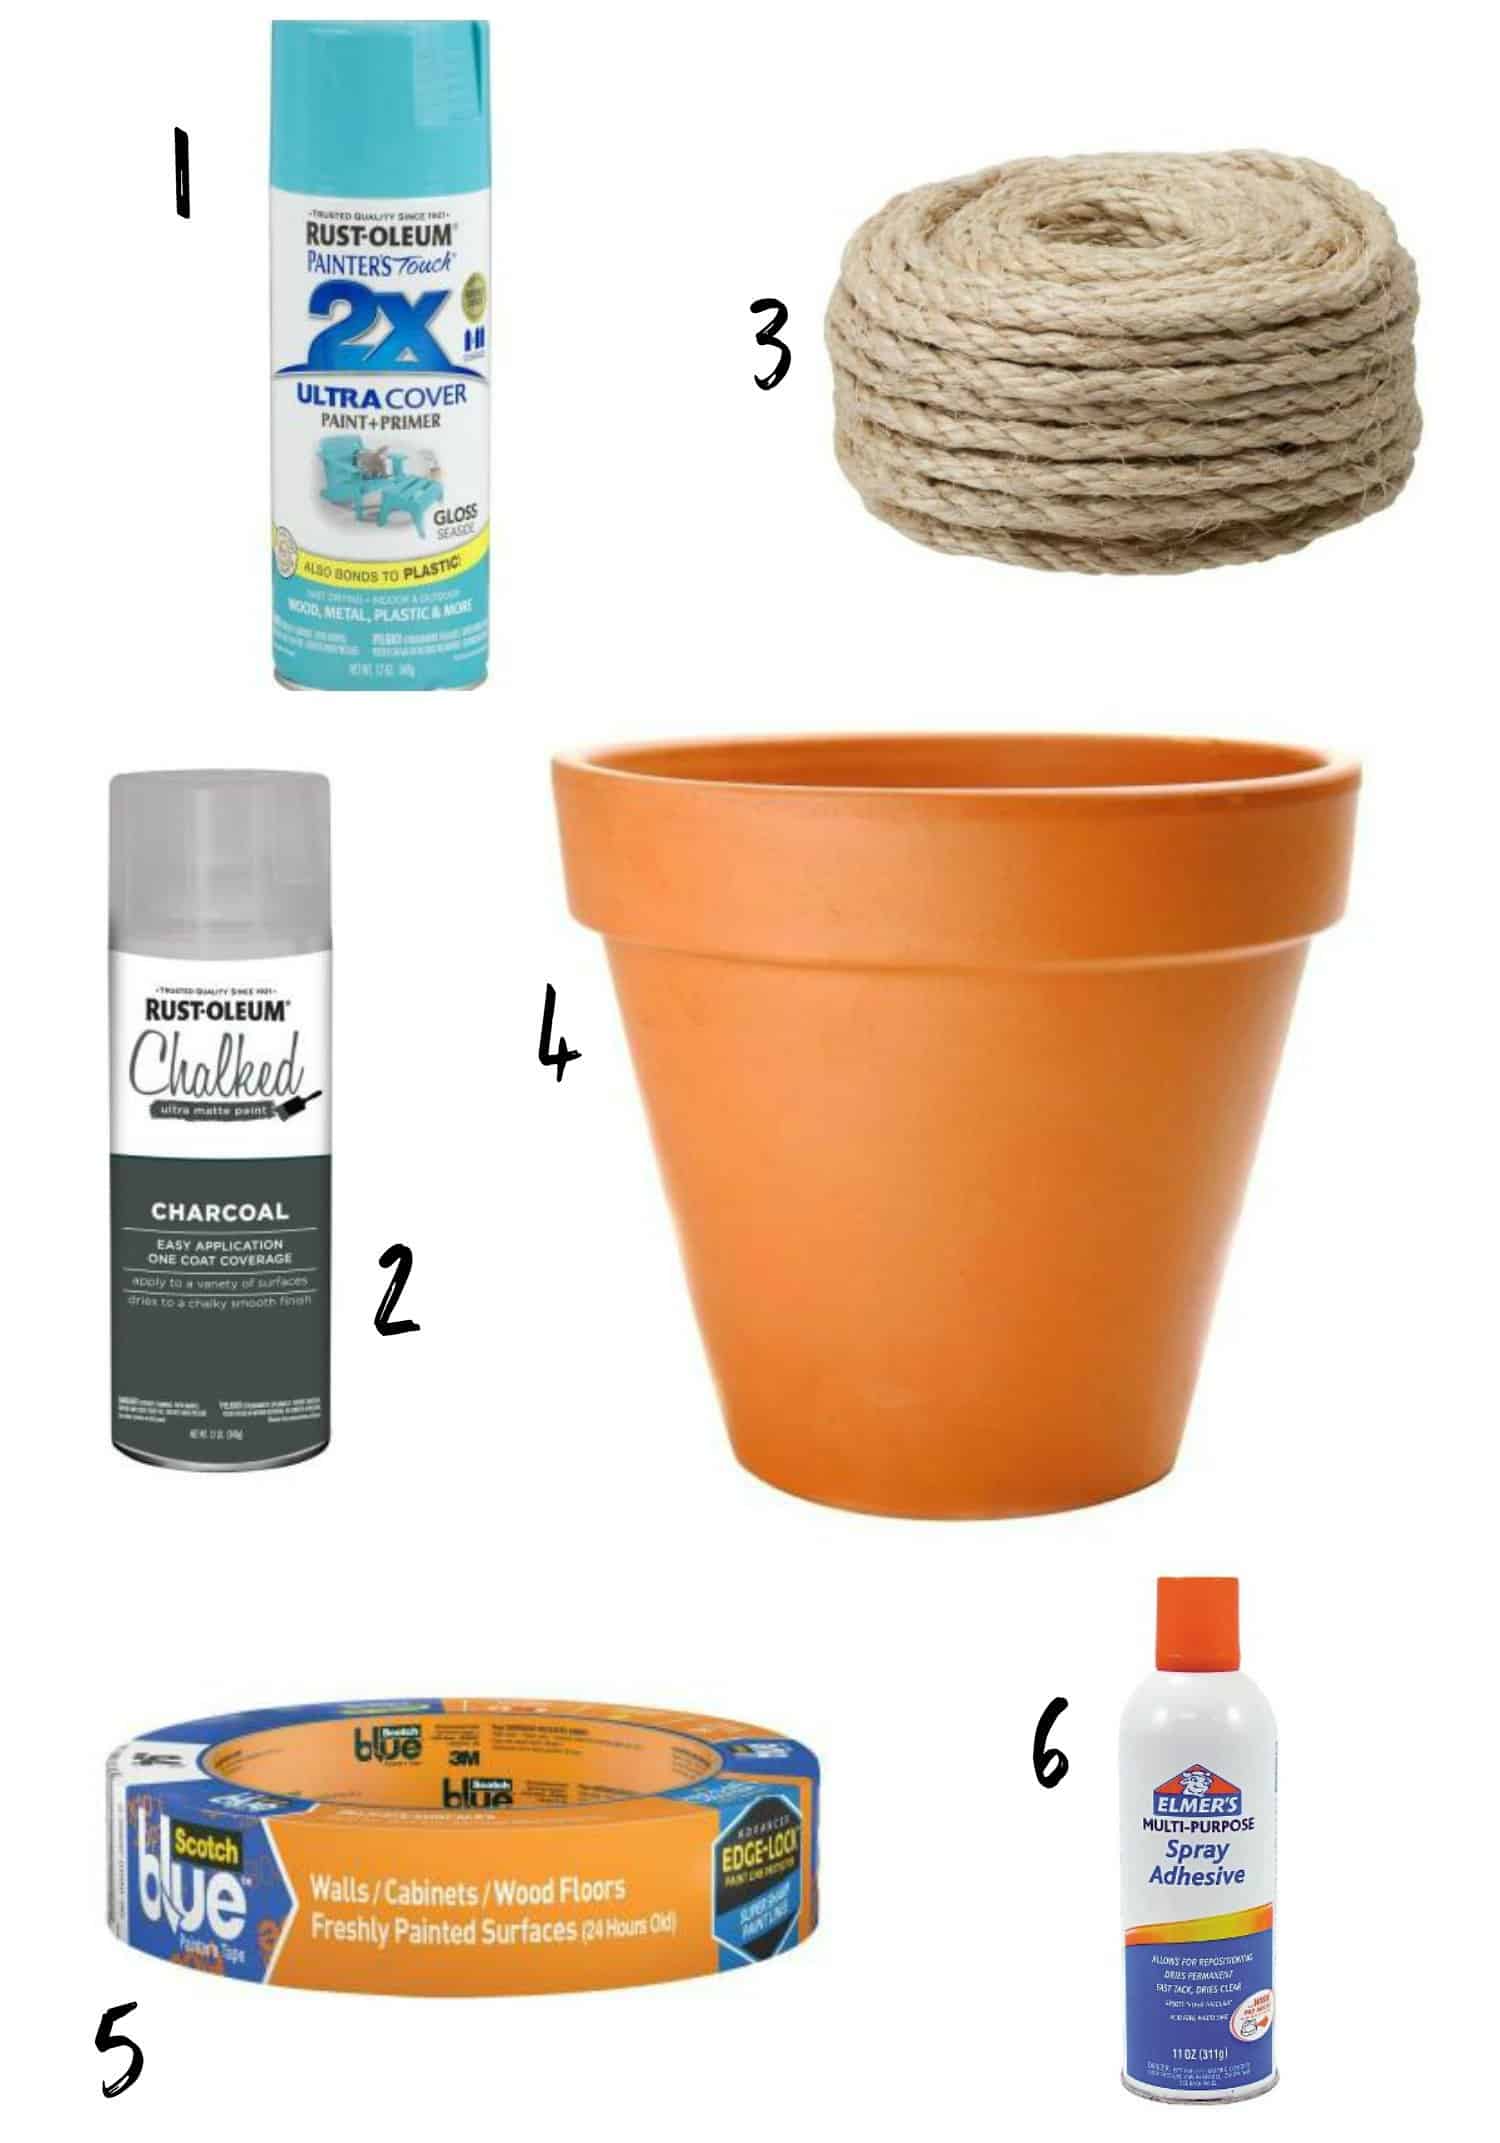 Rope wrapped and painted DIY planters. Perfect easy DIY to kick off summer. Can be customized with any color to compliment your garden area. Makes a great DIY gift